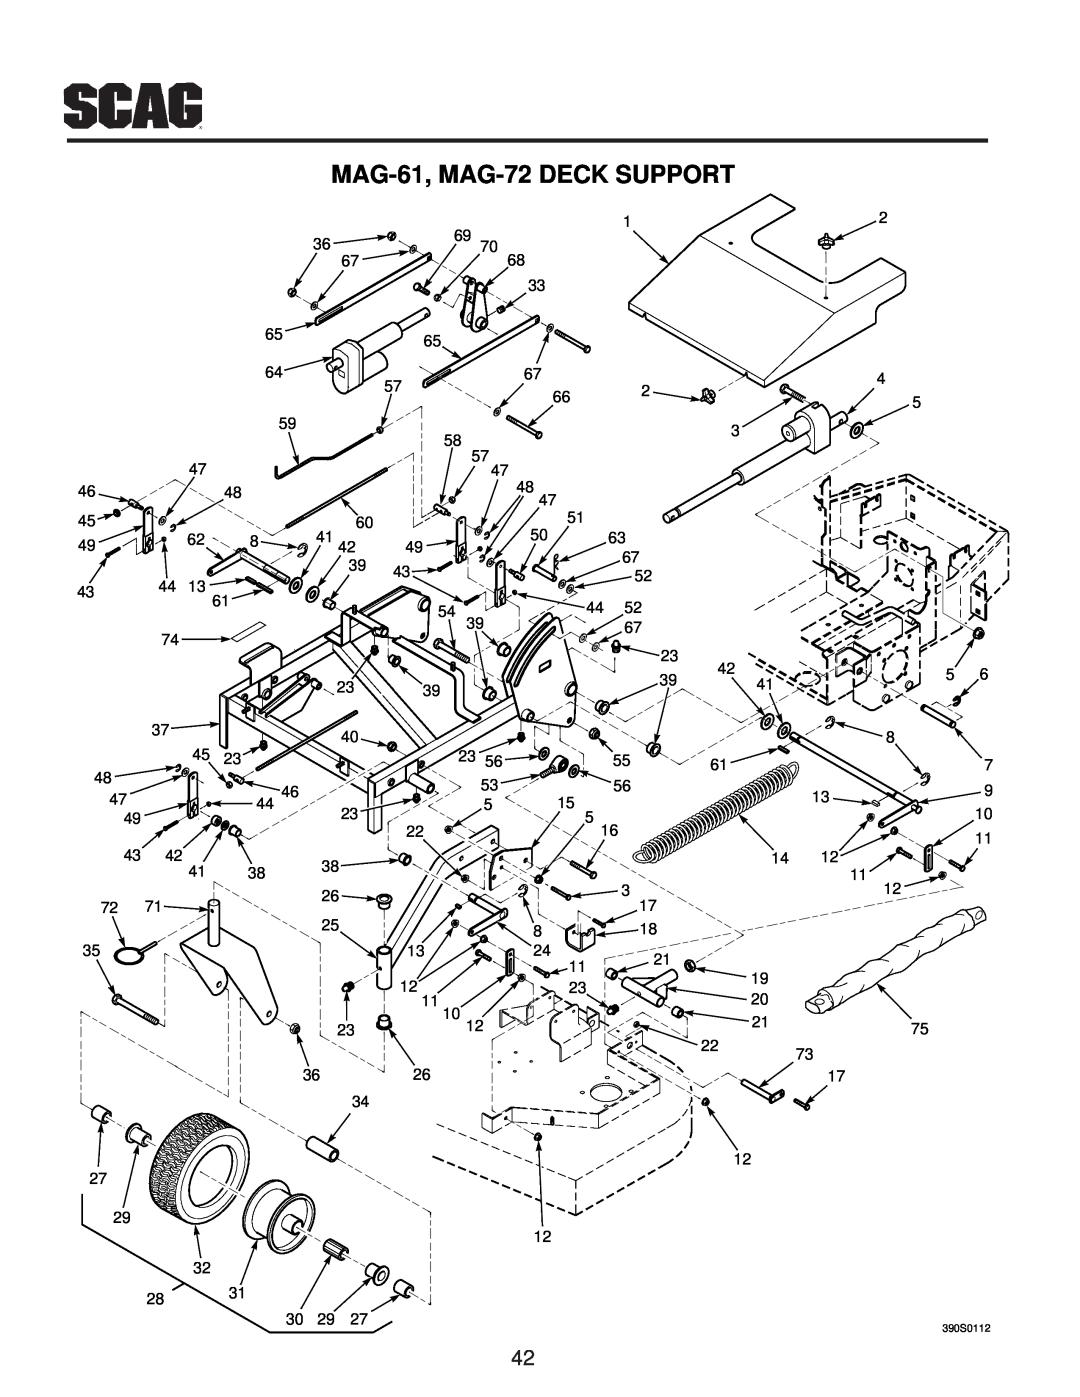 Scag Power Equipment manual MAG-61, MAG-72 DECK SUPPORT, 30 29, 390S0112 